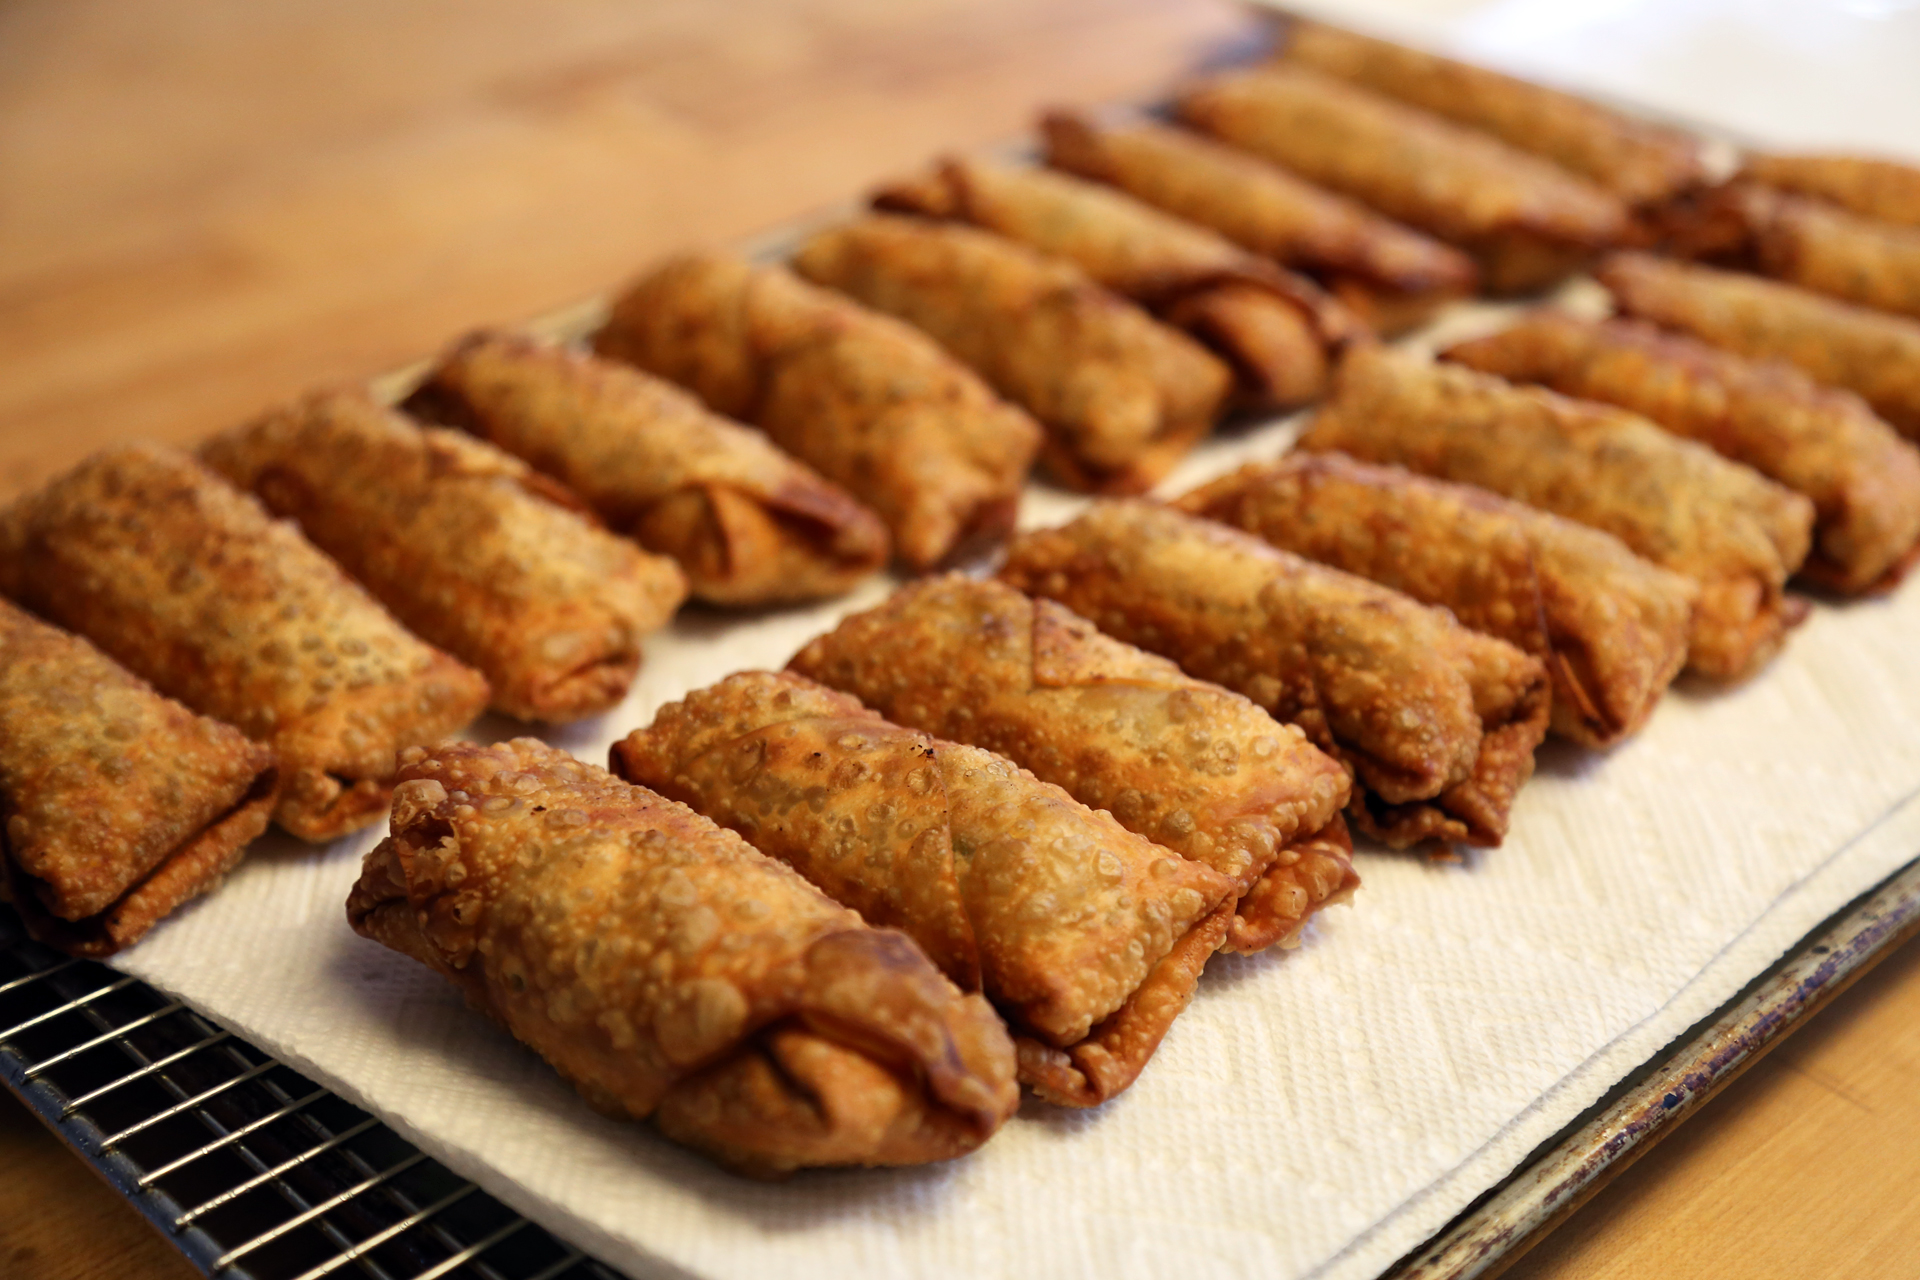 Line the rack with paper towels and keep them in the oven to stay warm while you finish frying the remaining eggrolls.